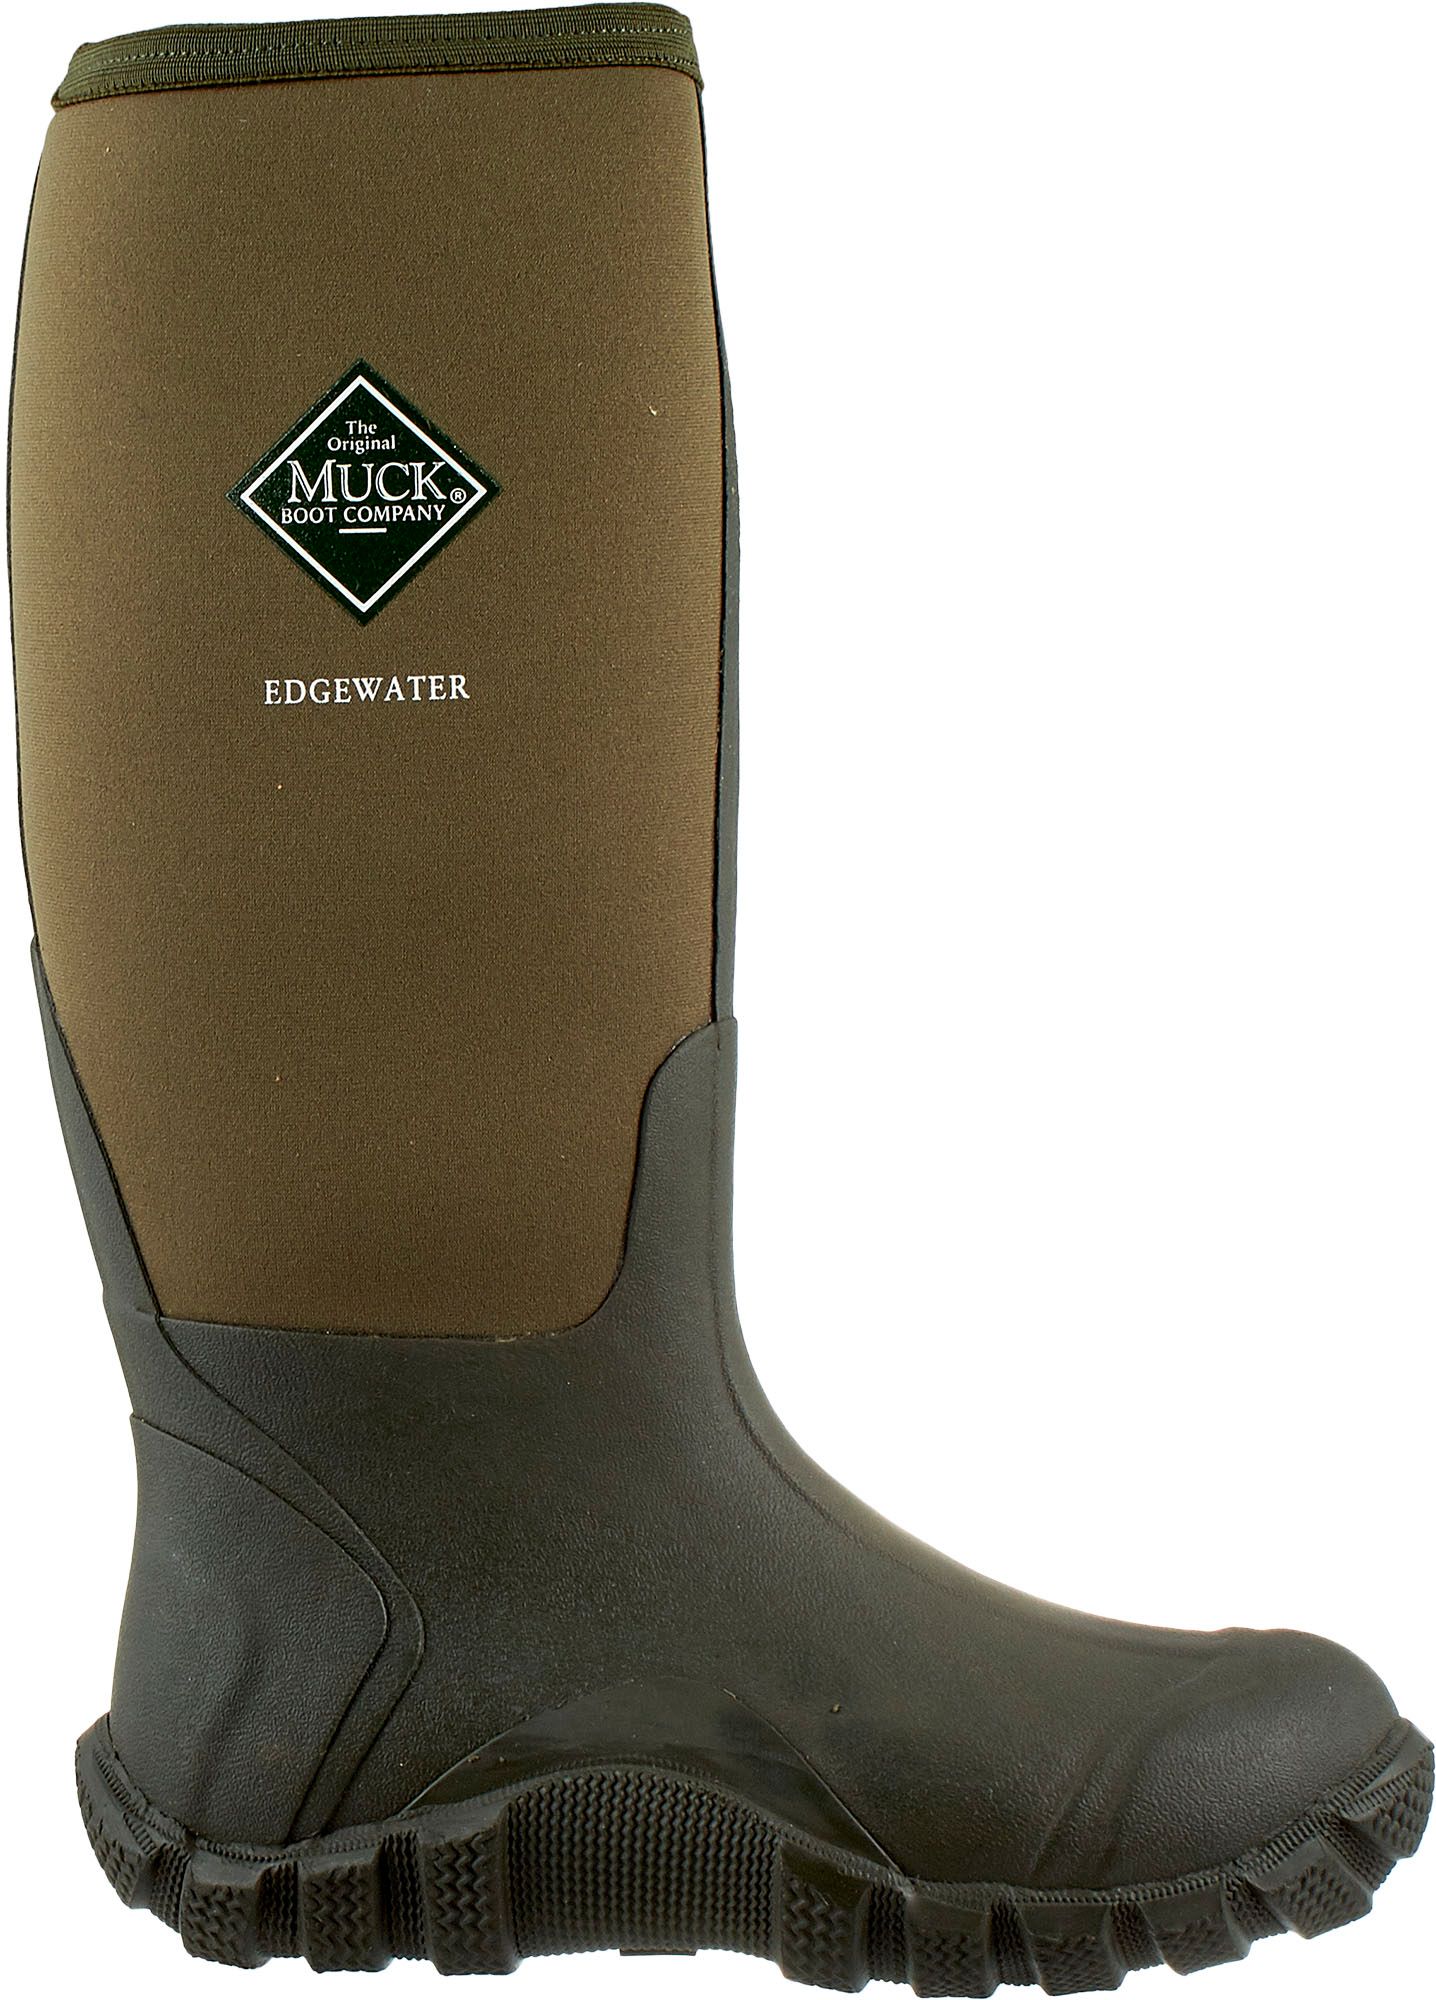 muck chore boots temperature rating